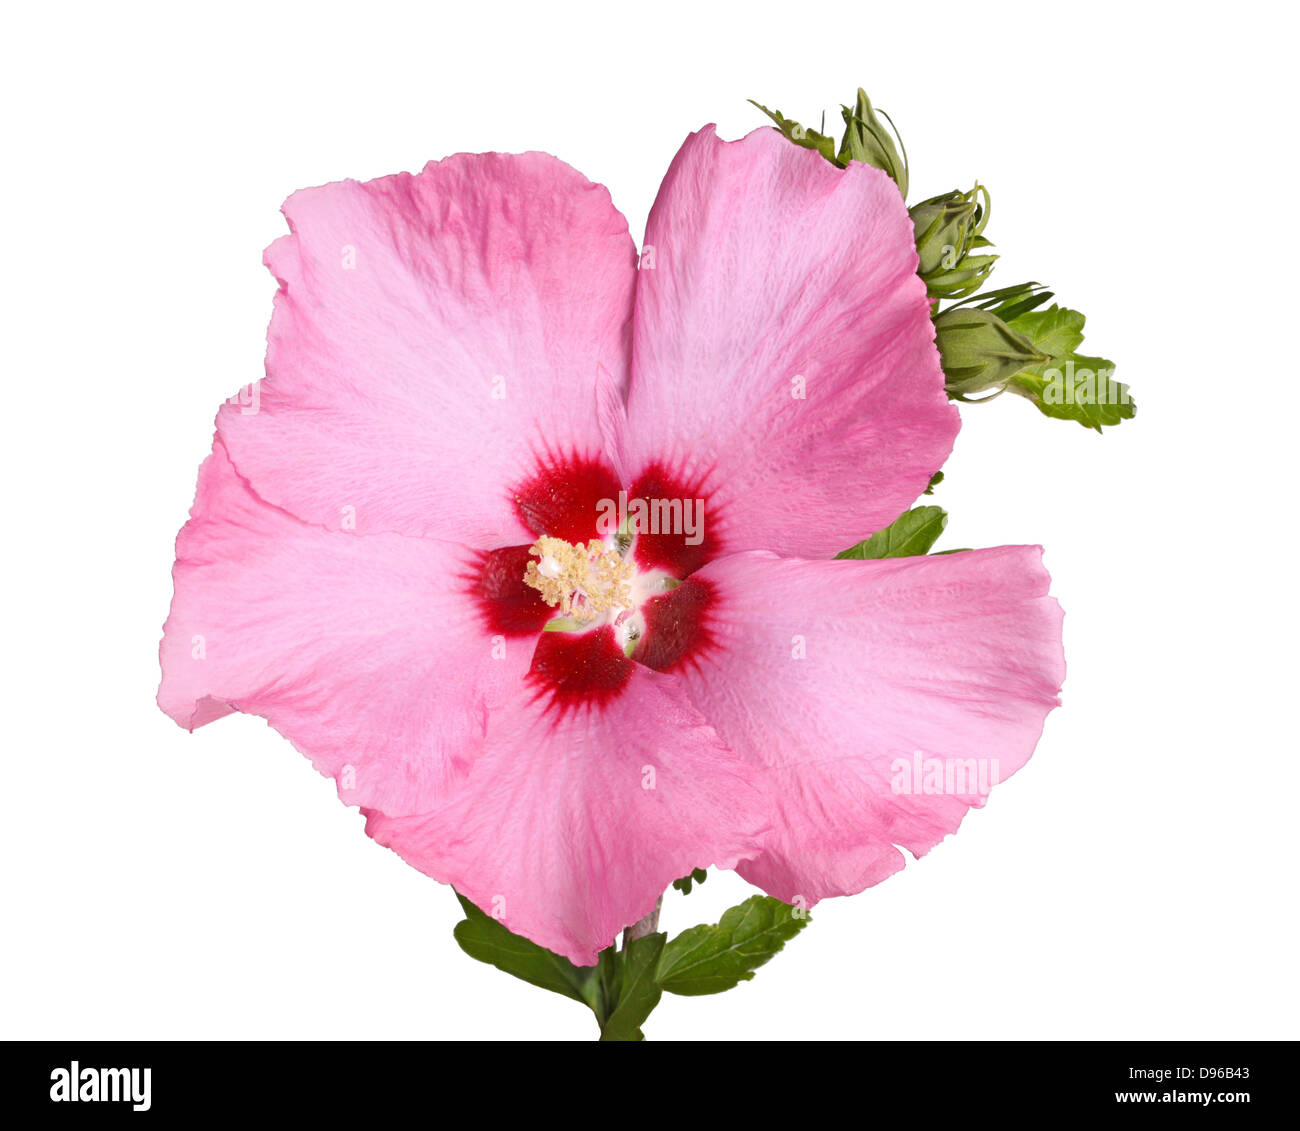 A single purple flower and buds of the Rose of Sharon (Hibiscus syriacus) plant isolated against a white background Stock Photo